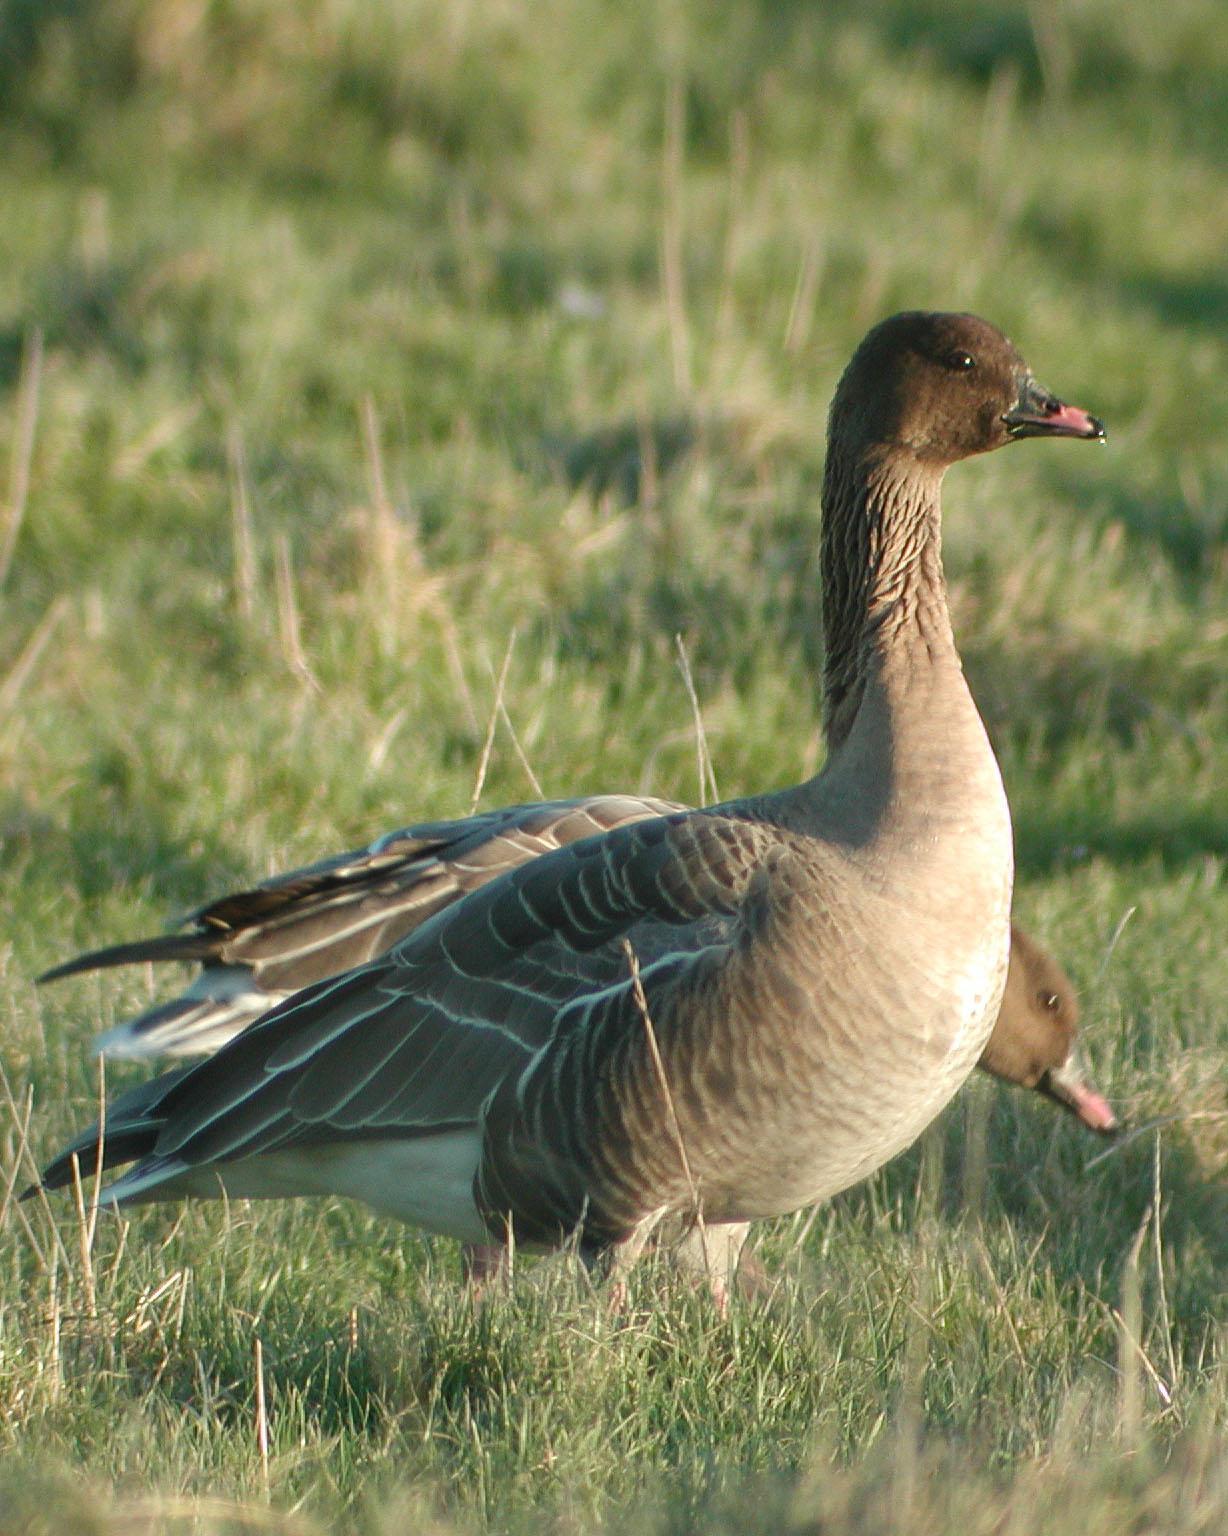 Pink-footed Goose Photo by Steve Percival